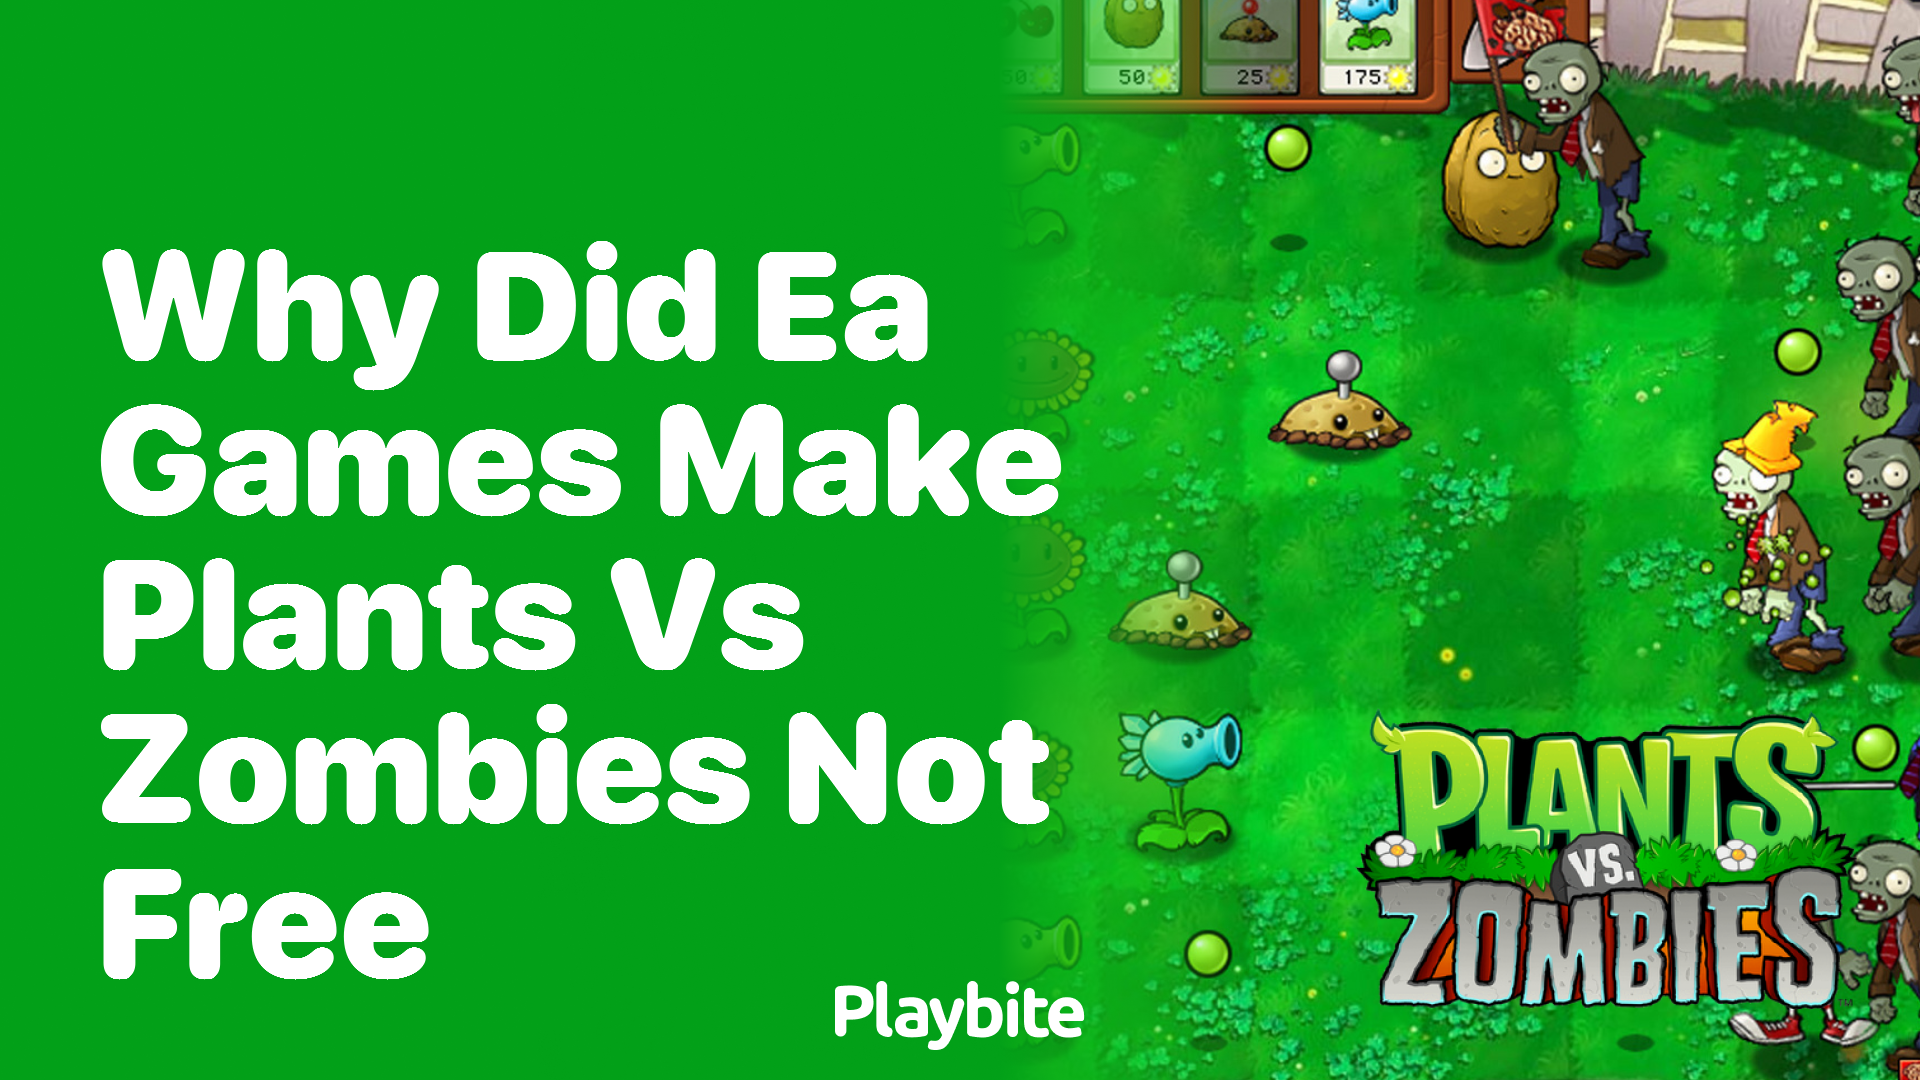 Why did EA Games make Plants vs Zombies not free?